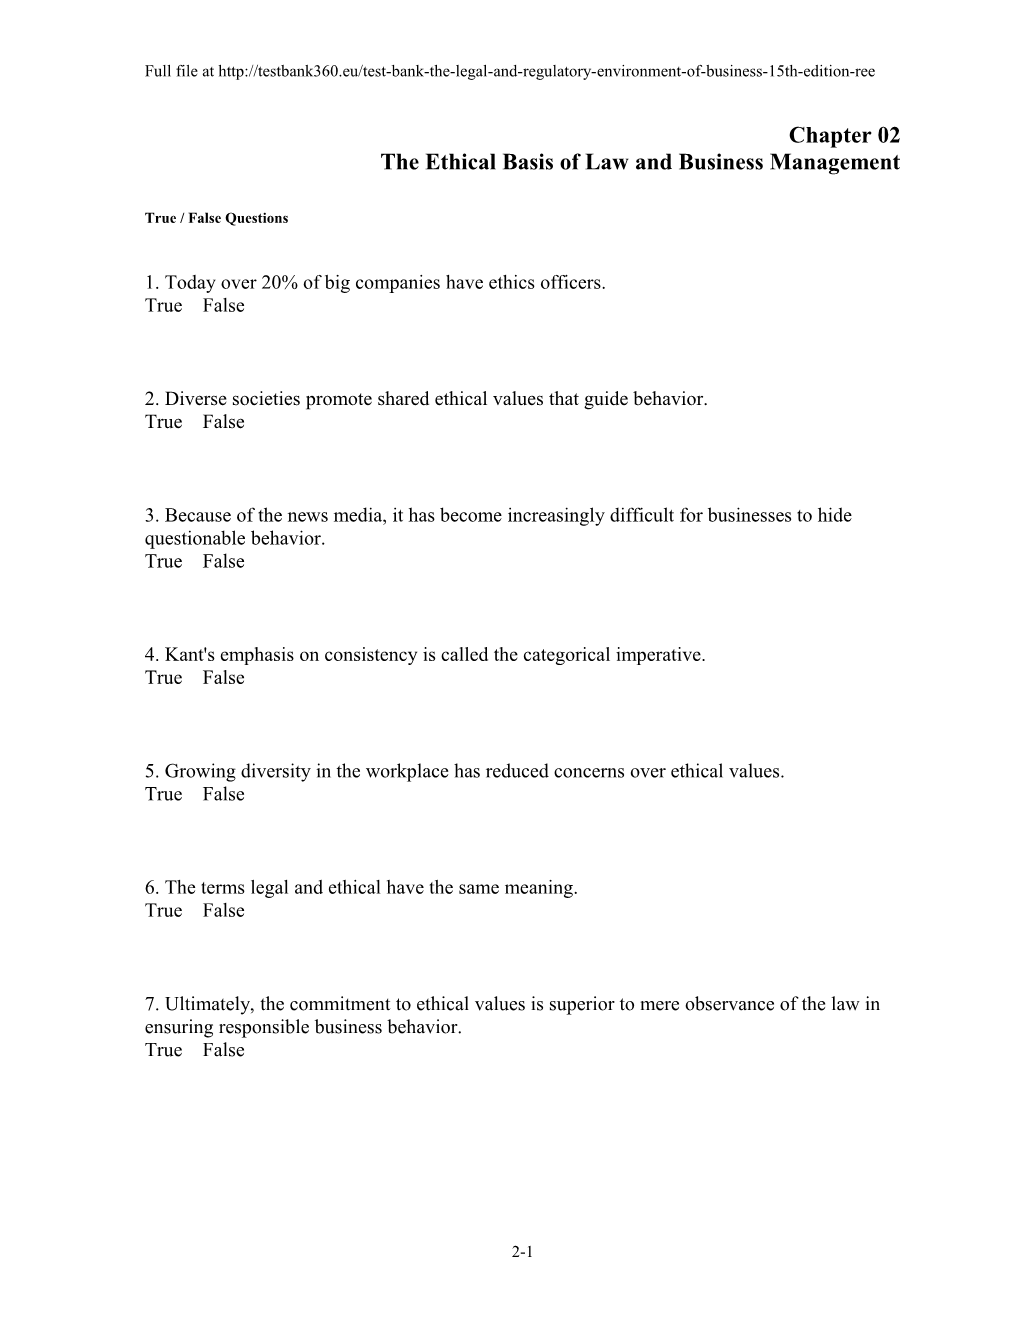 Chapter 02 the Ethical Basis of Law and Business Management